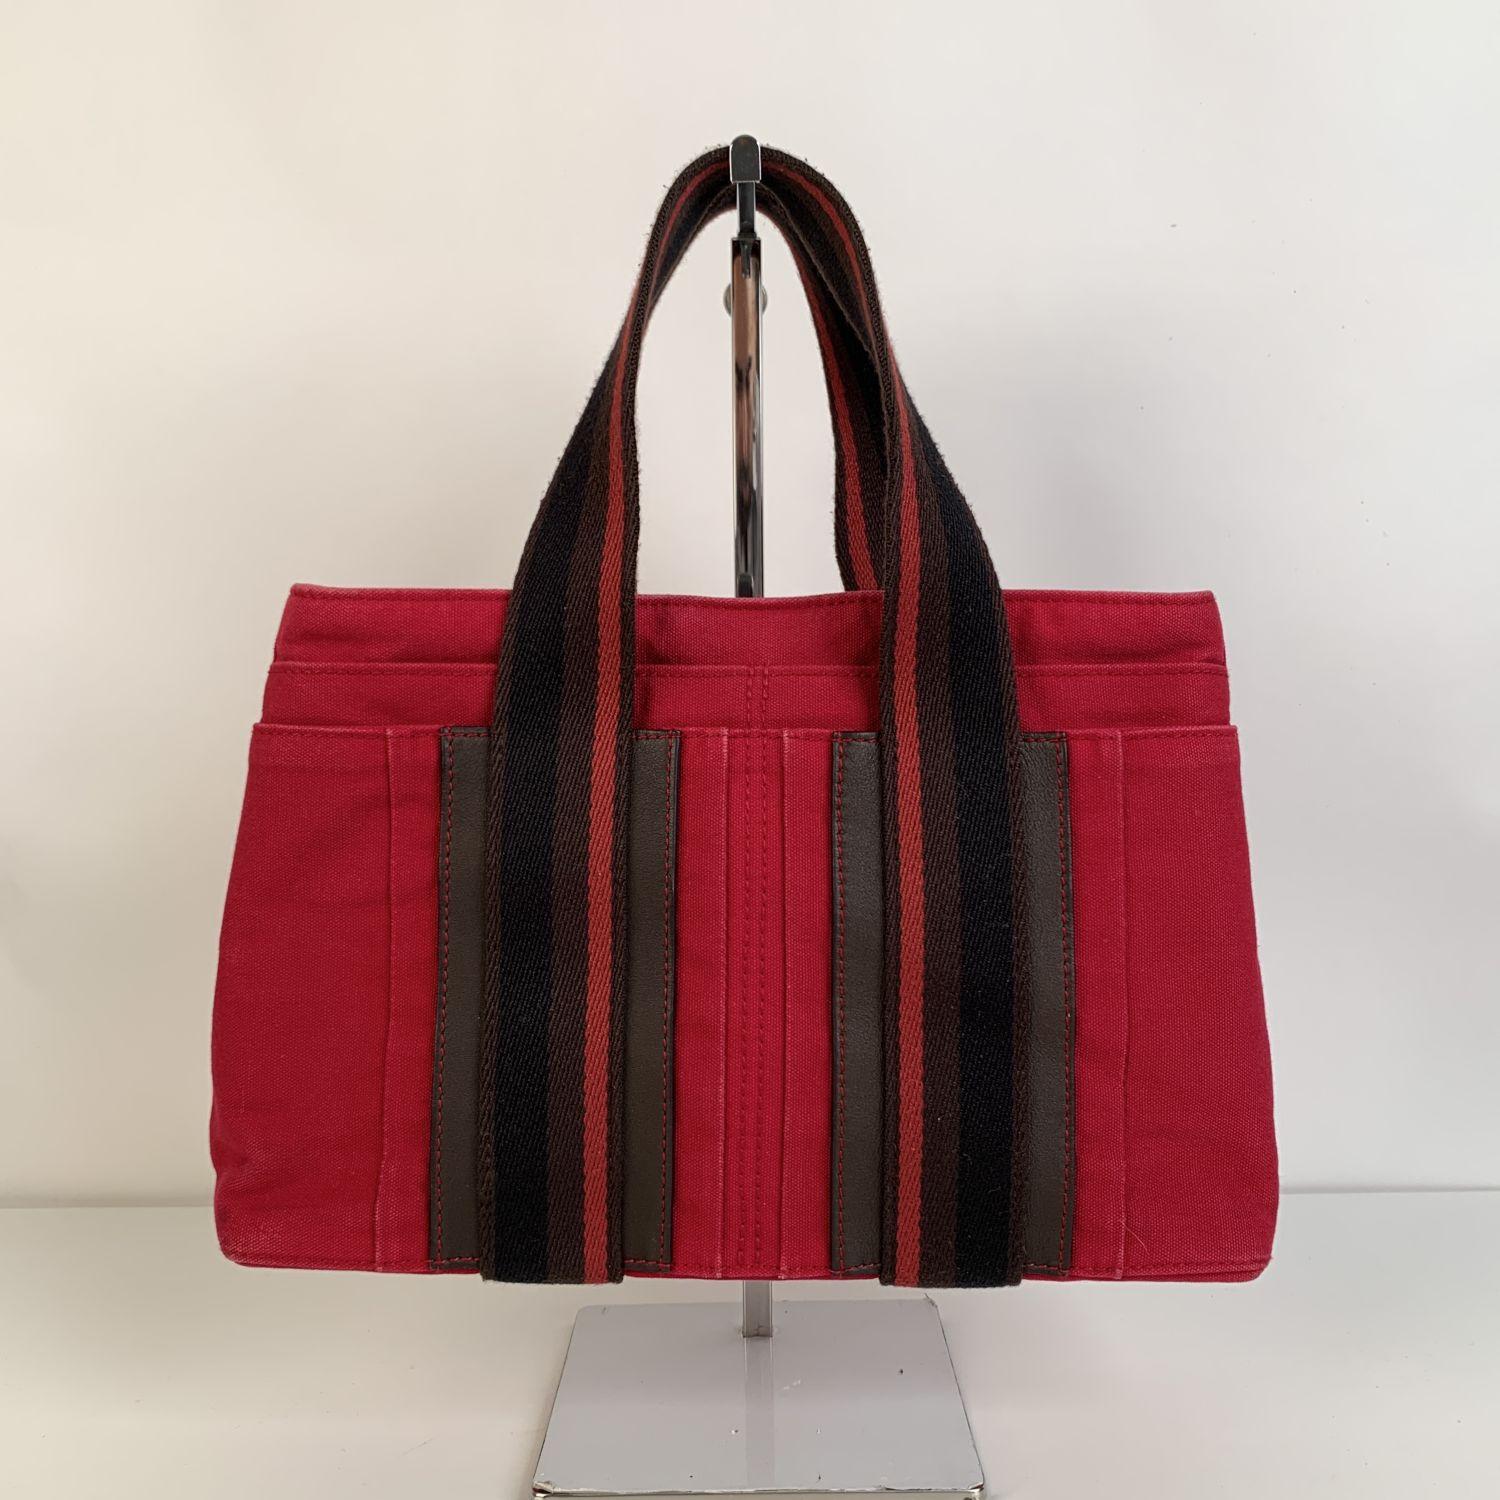 Hermès Horizontal Troca PM bag crafted in a red cotton canvas with genuine leather trim. It features double top handles, 4 front slip pockets and upper button closure. Canvas lining and and 1 zip pocket inside. 'Hermes' tag